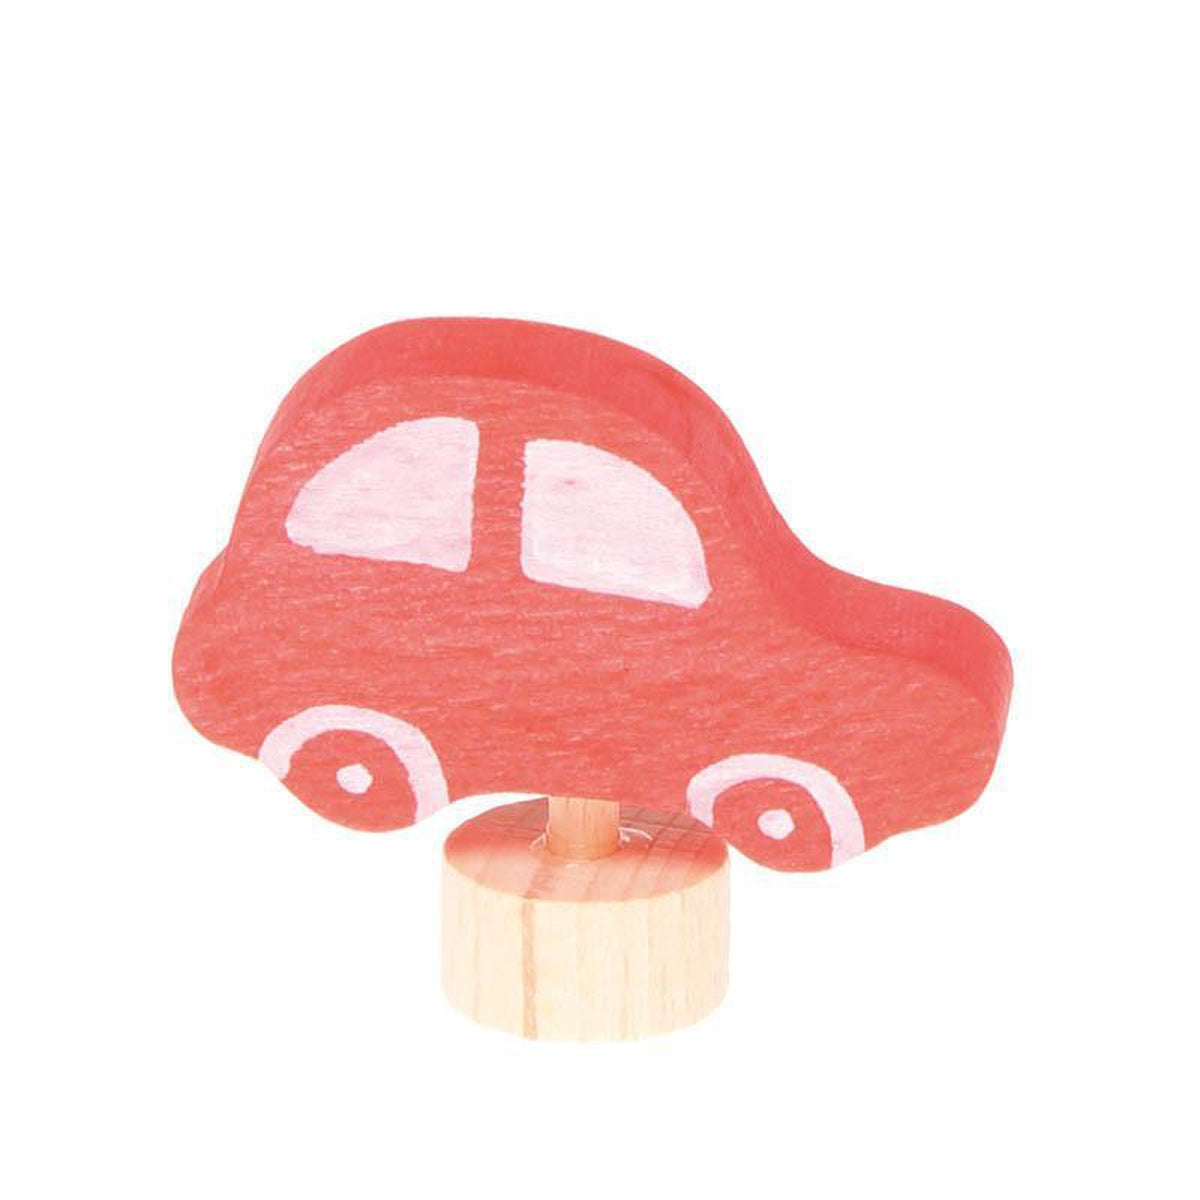 Grimm's birthday ring deco red car-decor-Fire the Imagination-Dilly Dally Kids